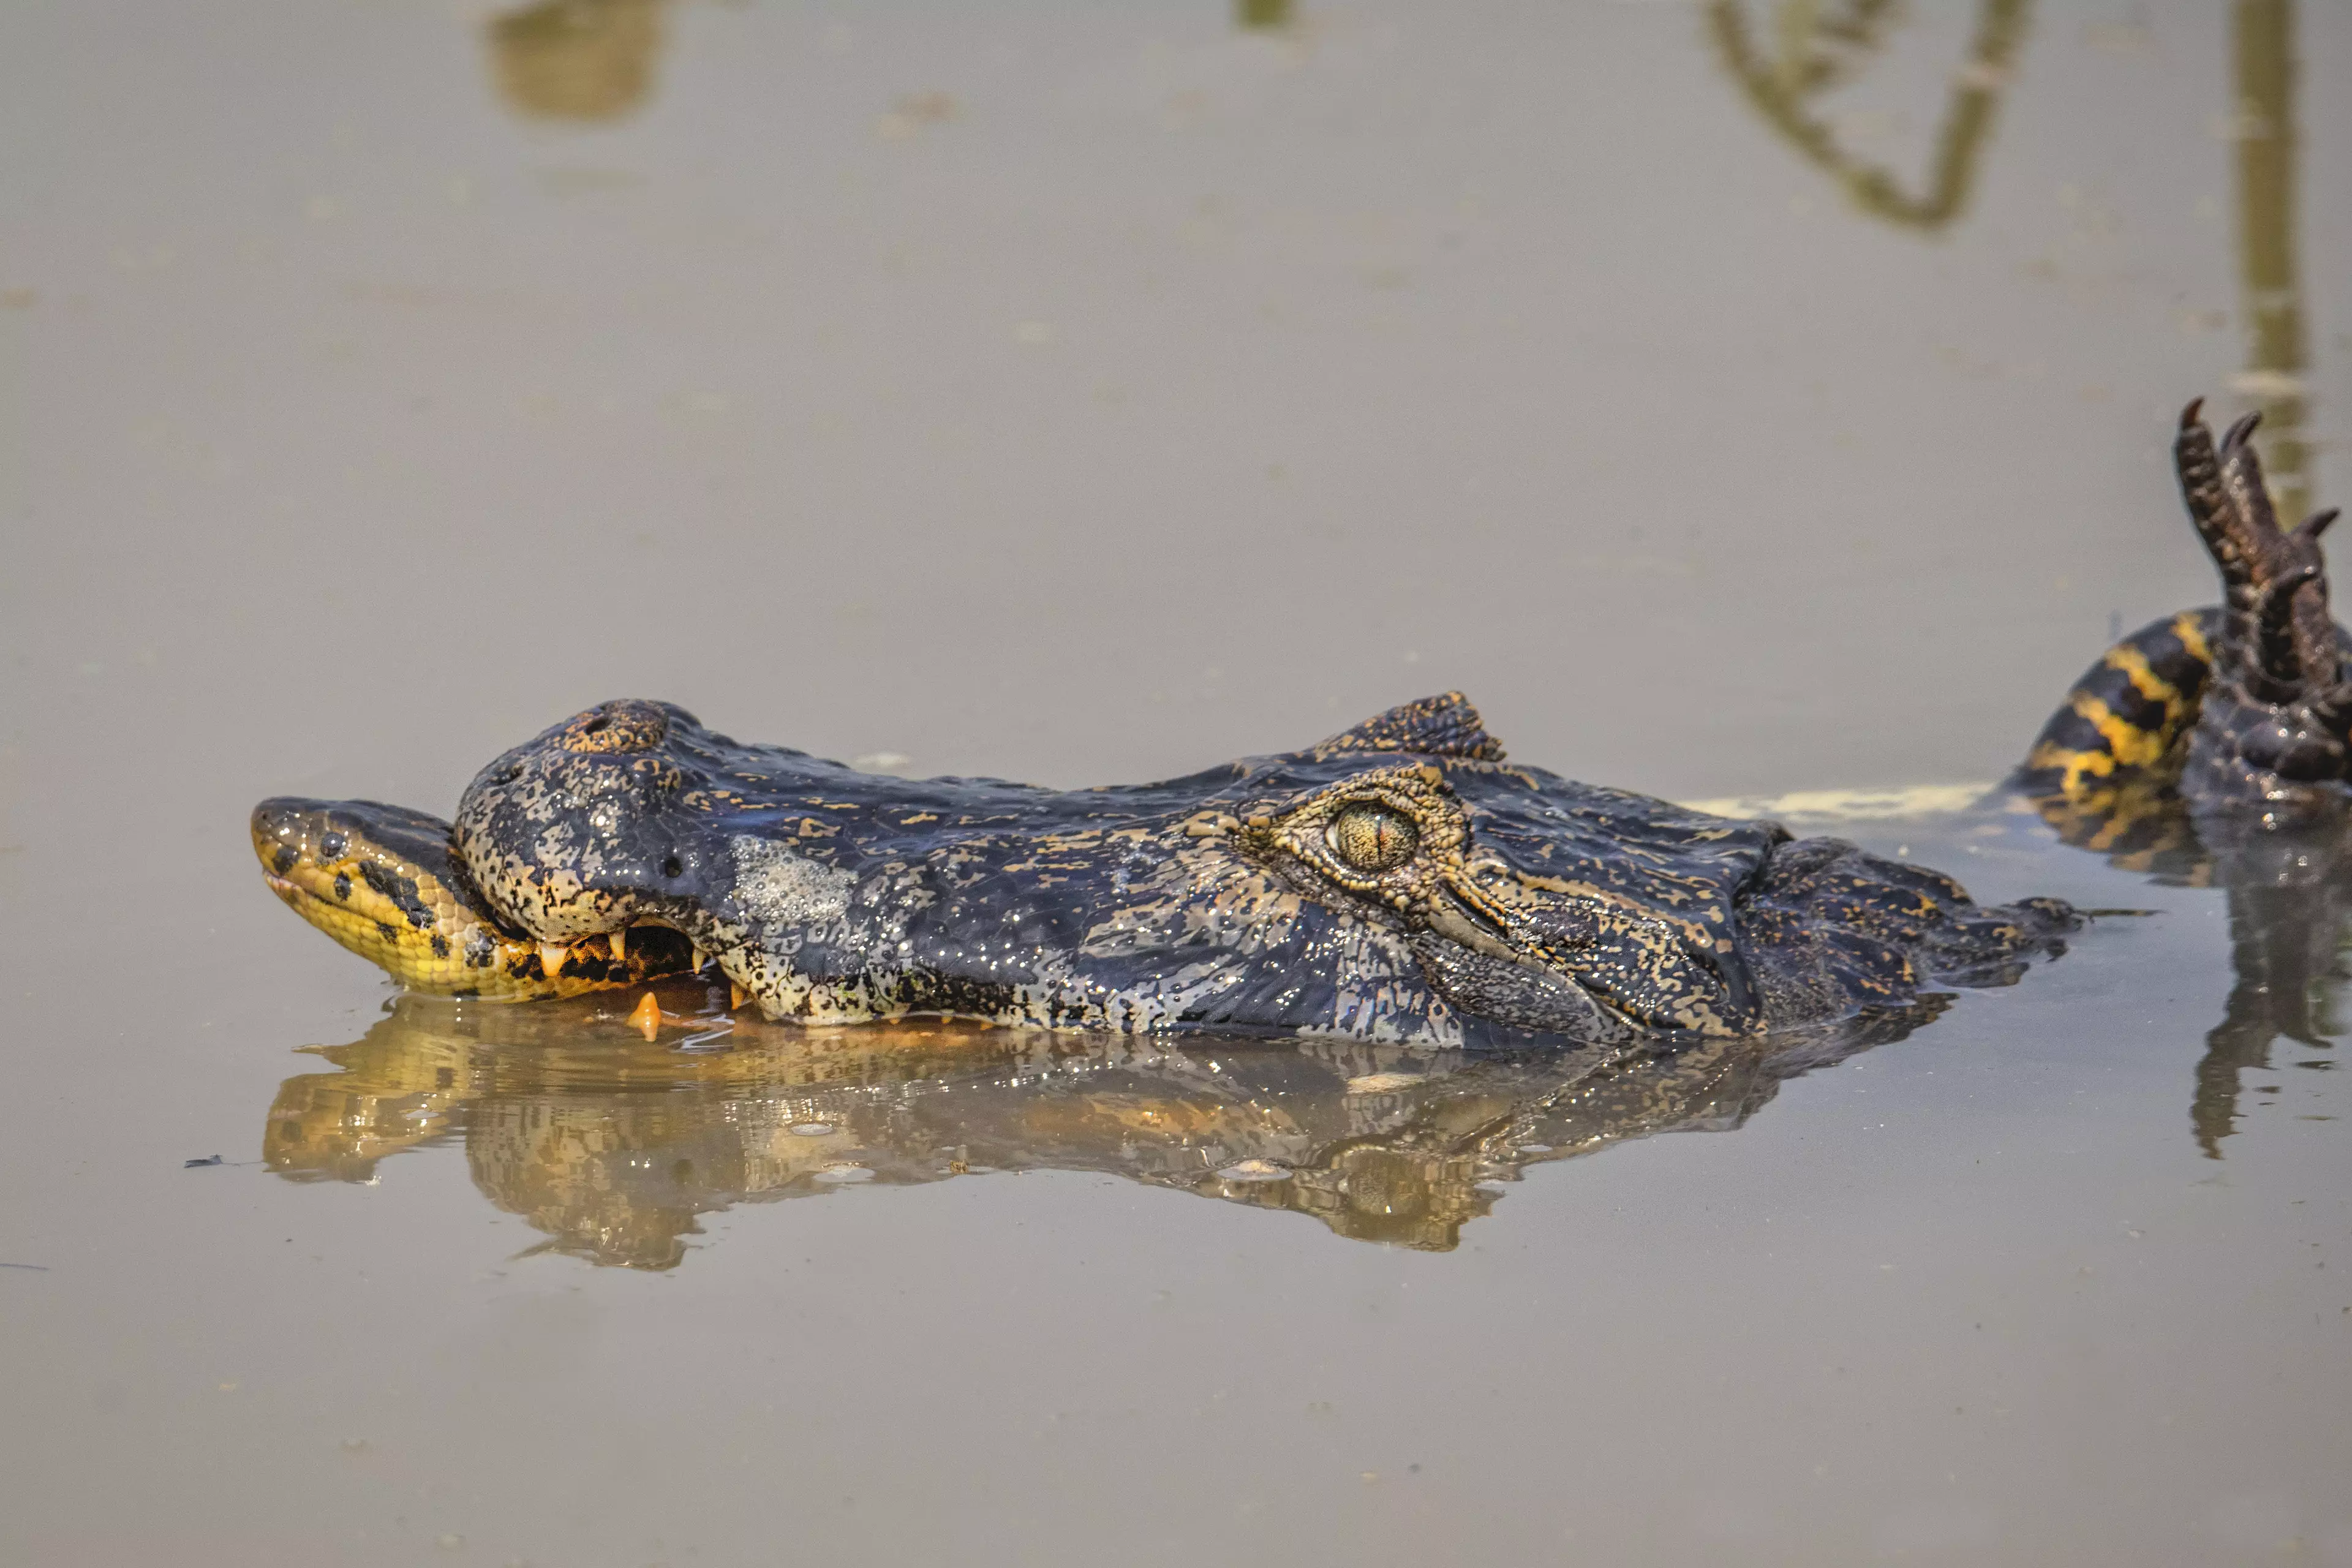 An anaconda and a caiman fought to the death in Brazil.